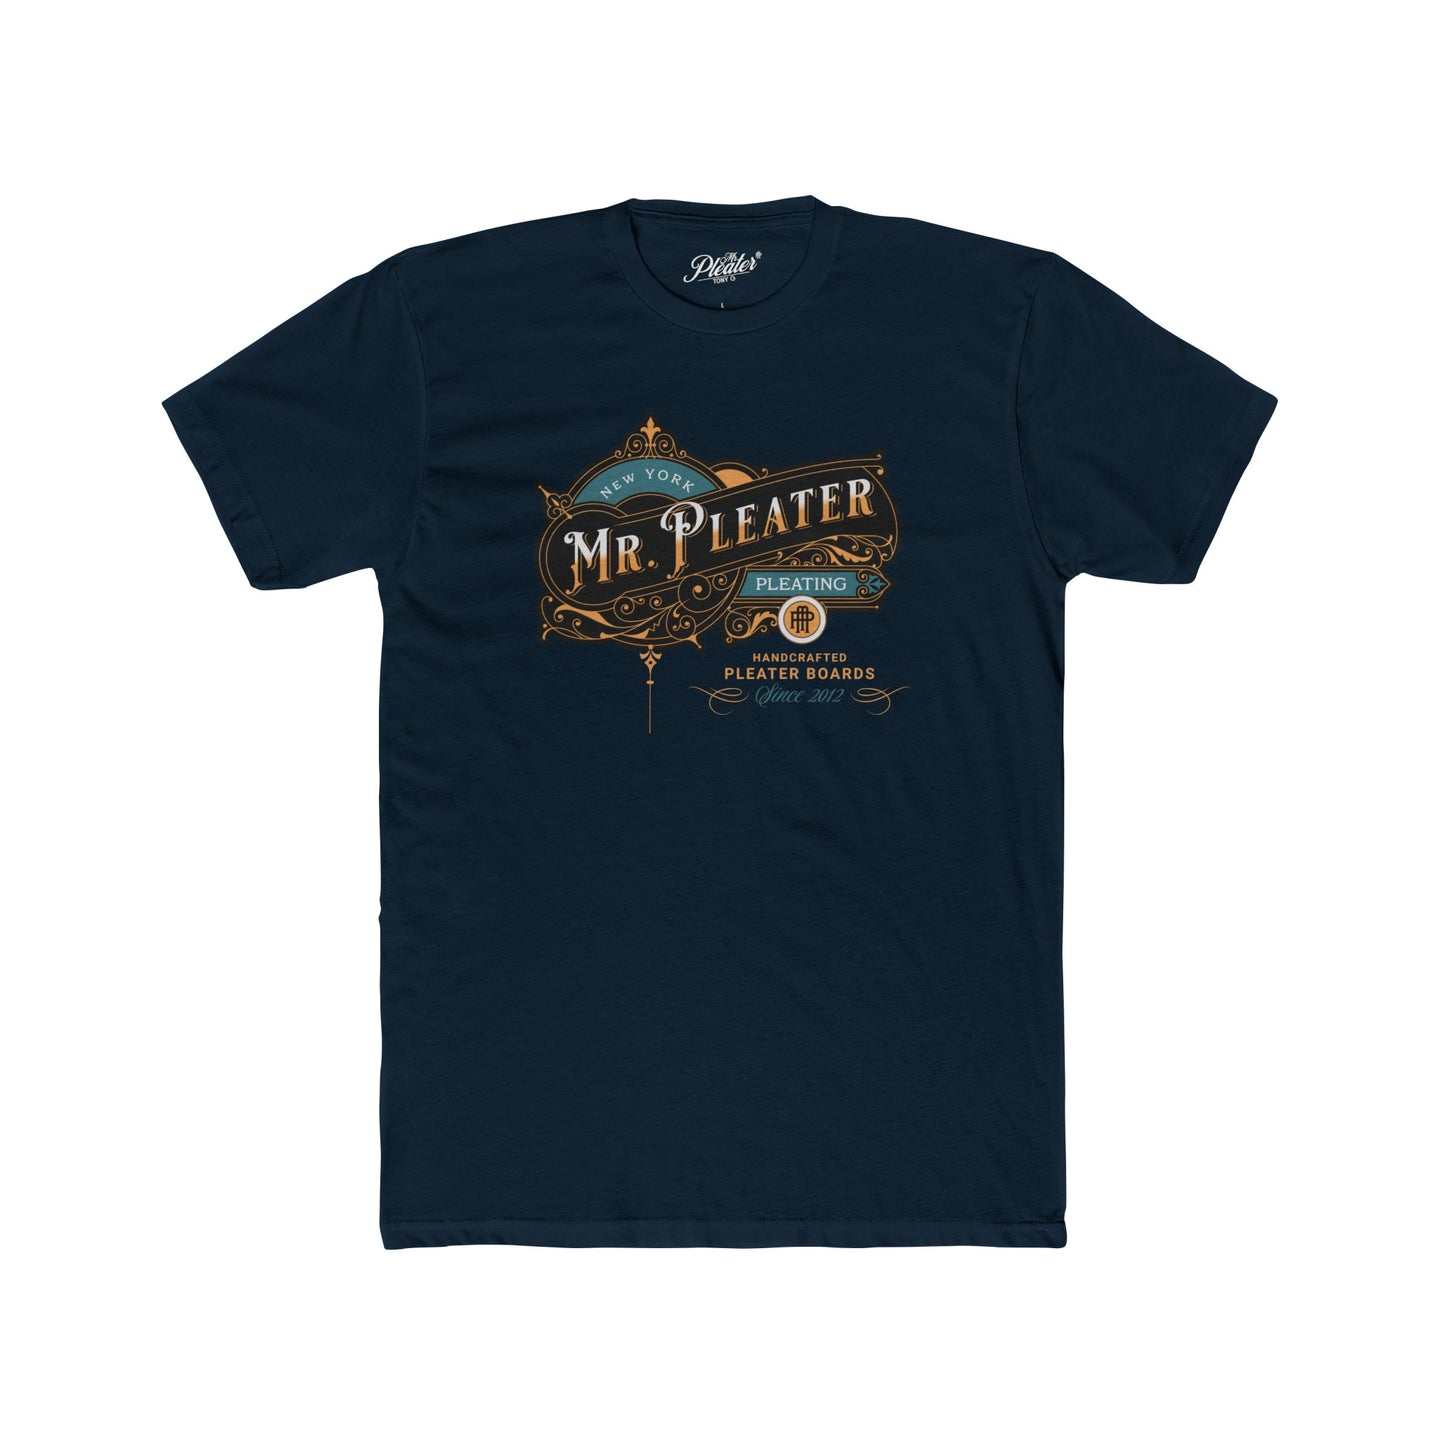 Mr. Pleater By TONY G Men's Cotton Crew Tee, featuring the Mr. Pleater Handcrafted Pleater Board 2 design